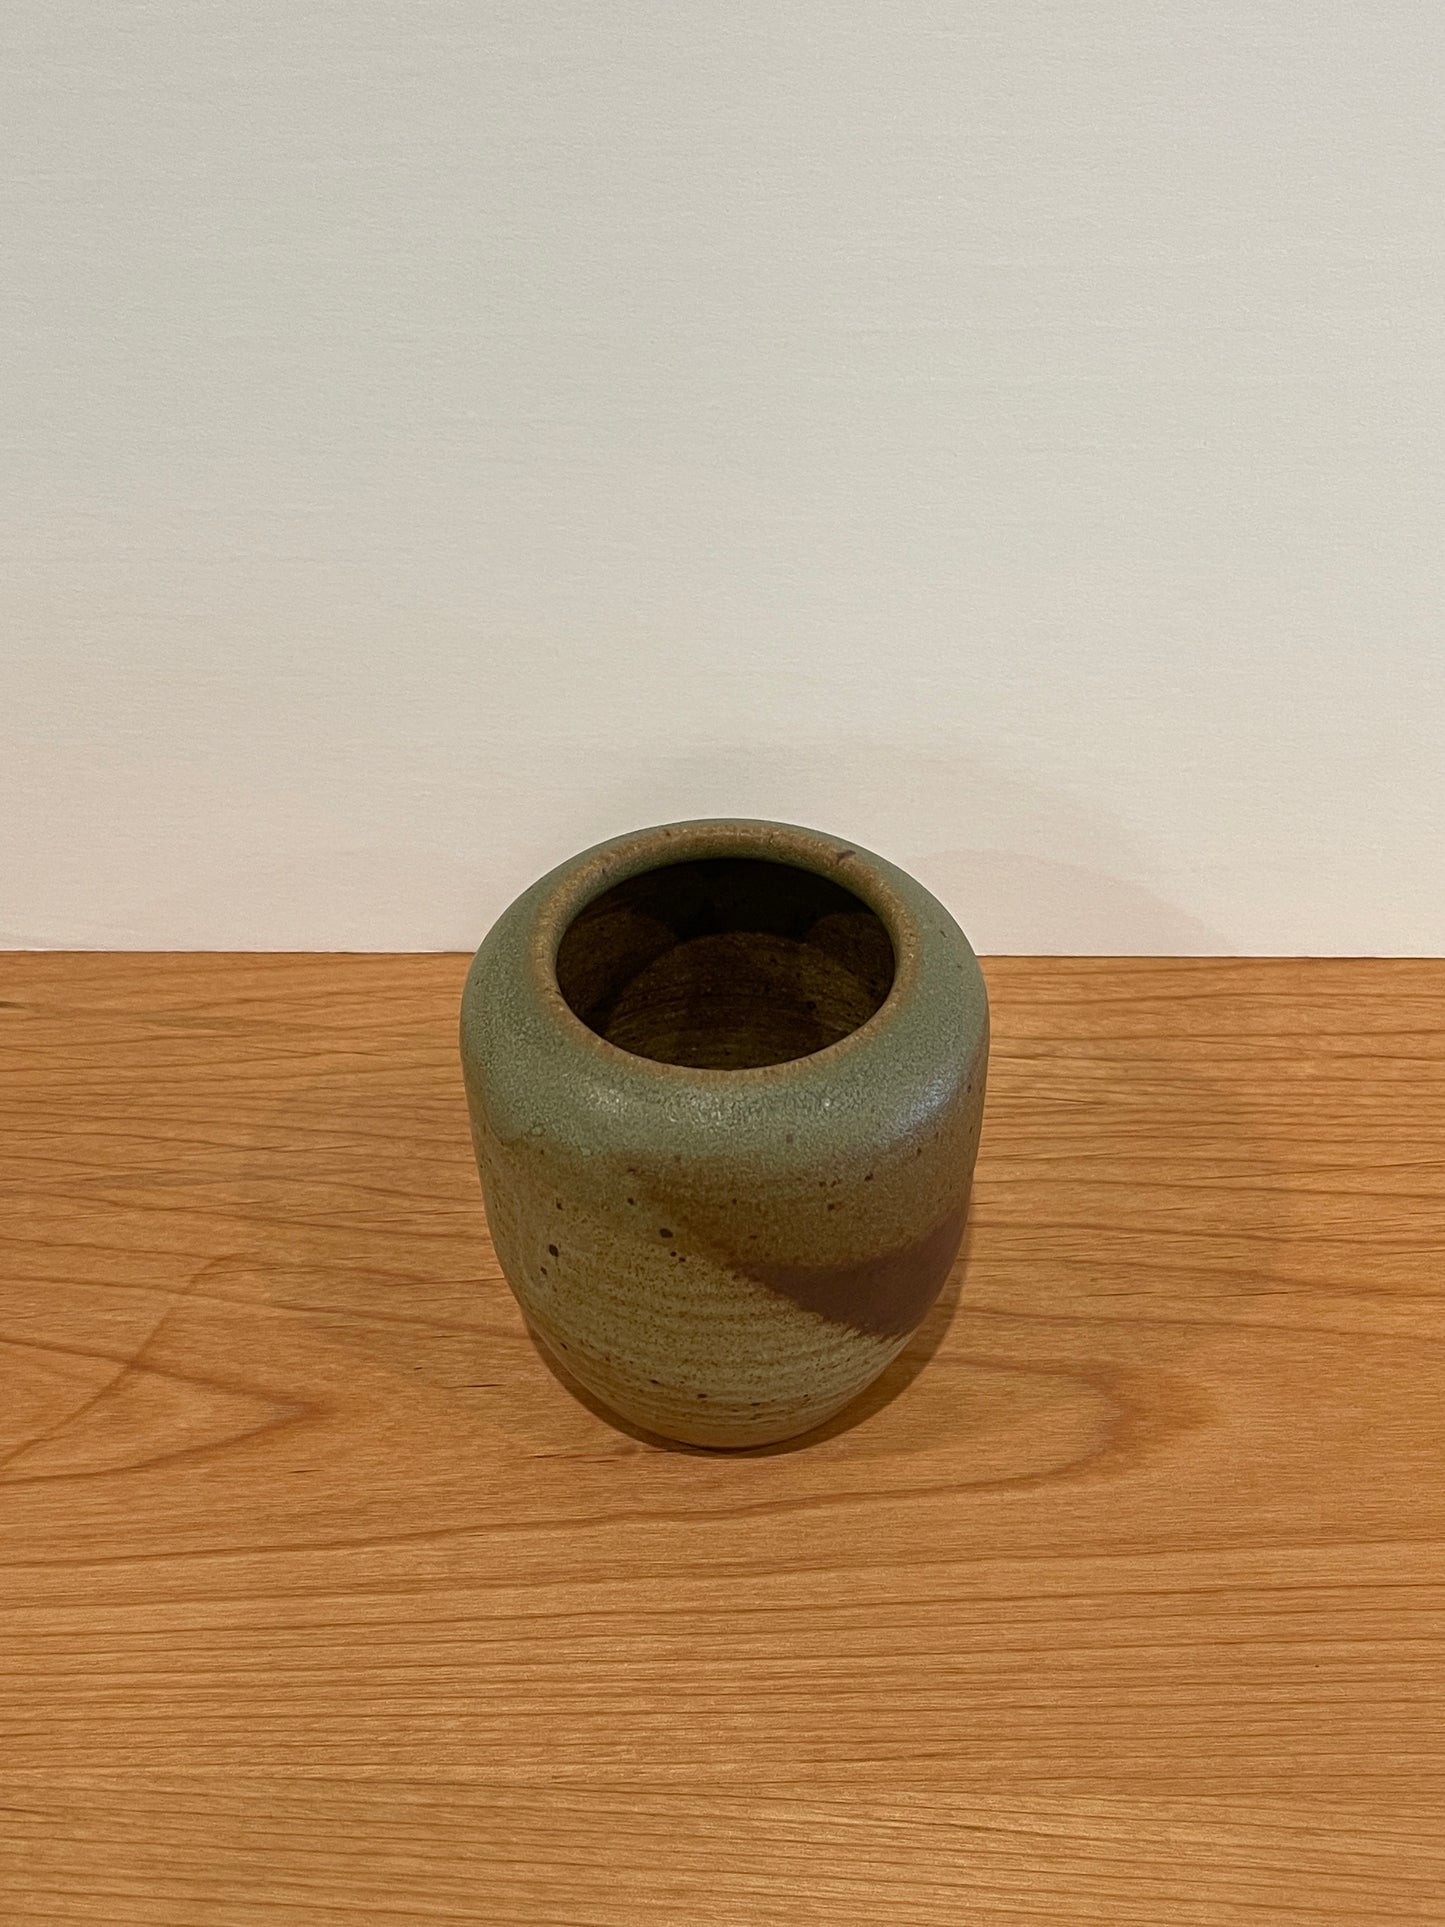 Shoshi Watanabe - Vase-Small-Brown and Light Blue